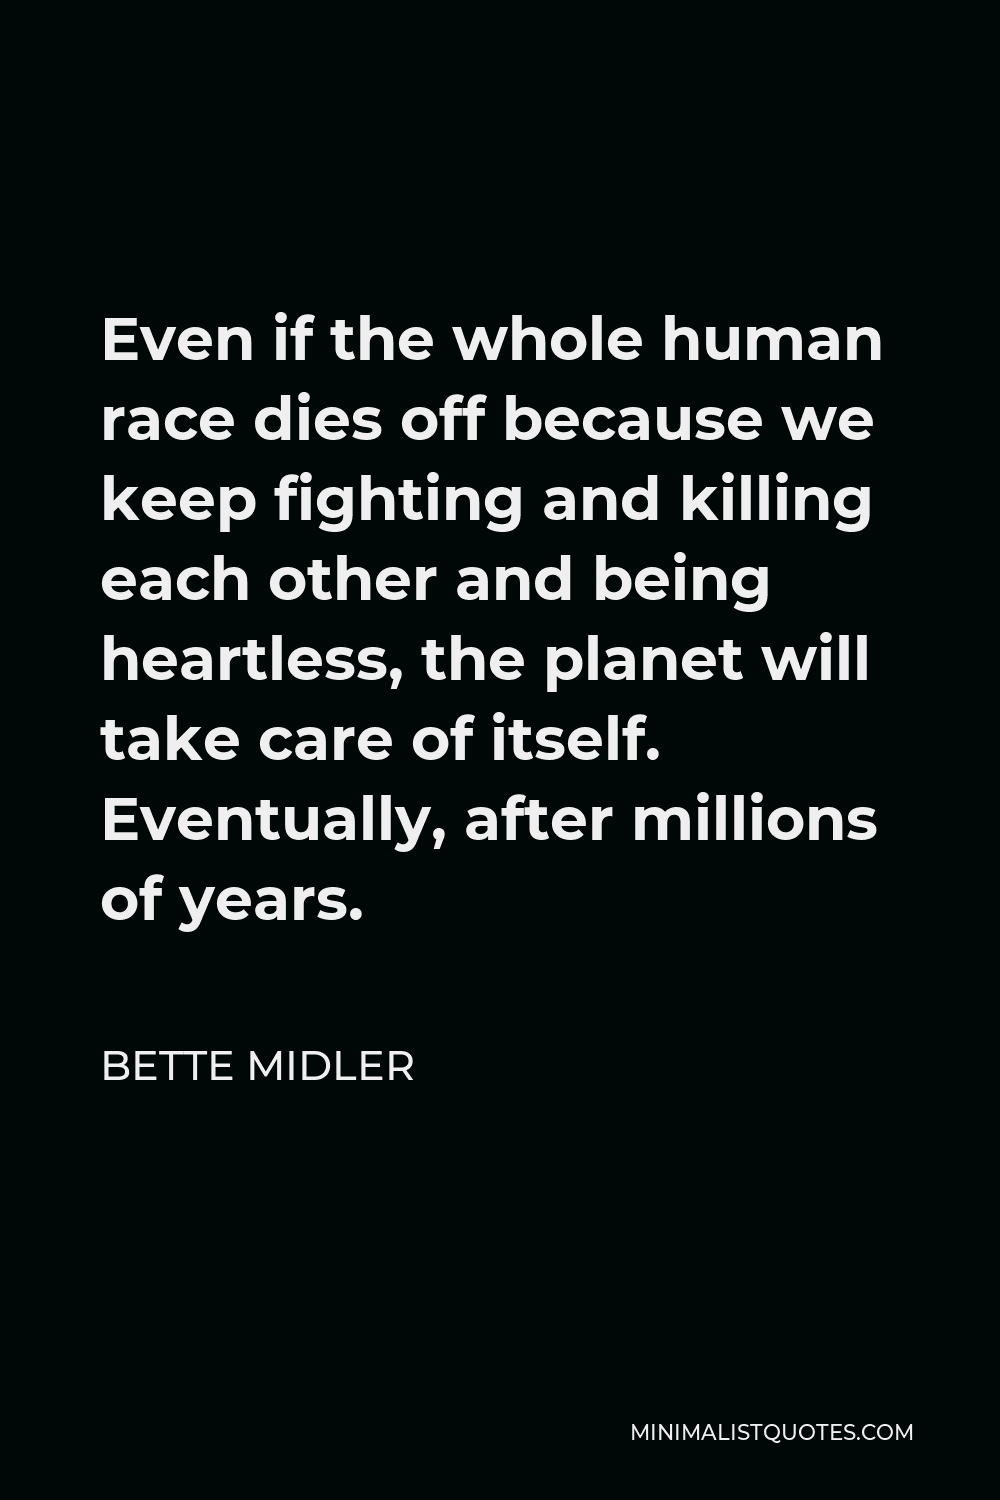 Bette Midler Quote - Even if the whole human race dies off because we keep fighting and killing each other and being heartless, the planet will take care of itself. Eventually, after millions of years.